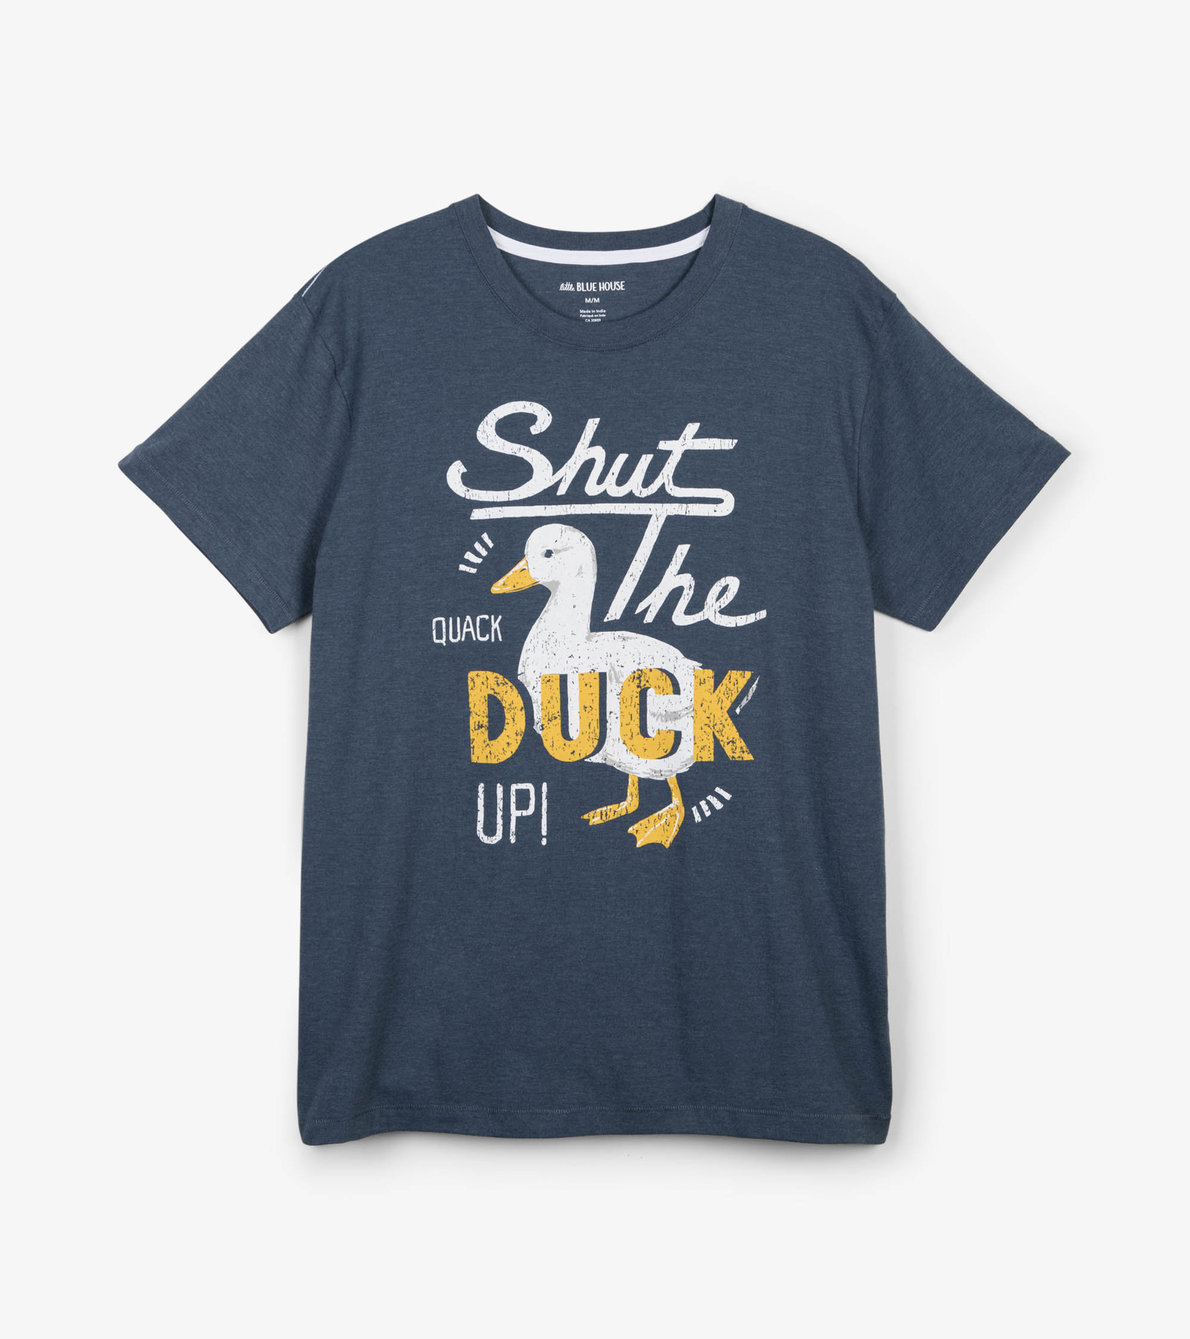 View larger image of Shut The Duck Up Men's Tee